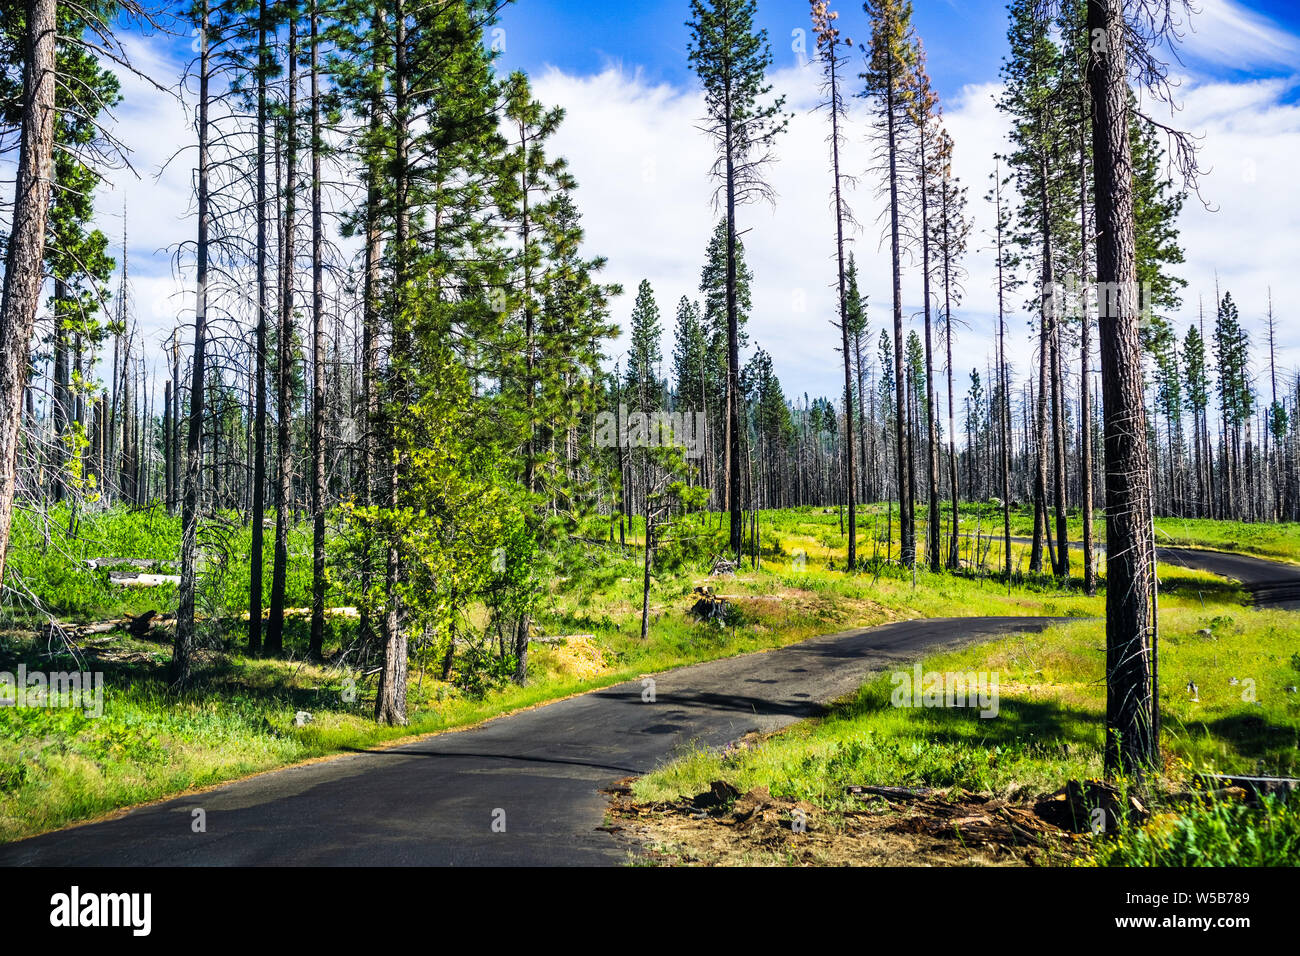 Narrow paved road crossing a lush meadow, Yosemite National Park, Sierra Nevada mountains, California; sunny day with white clouds rising ahead Stock Photo